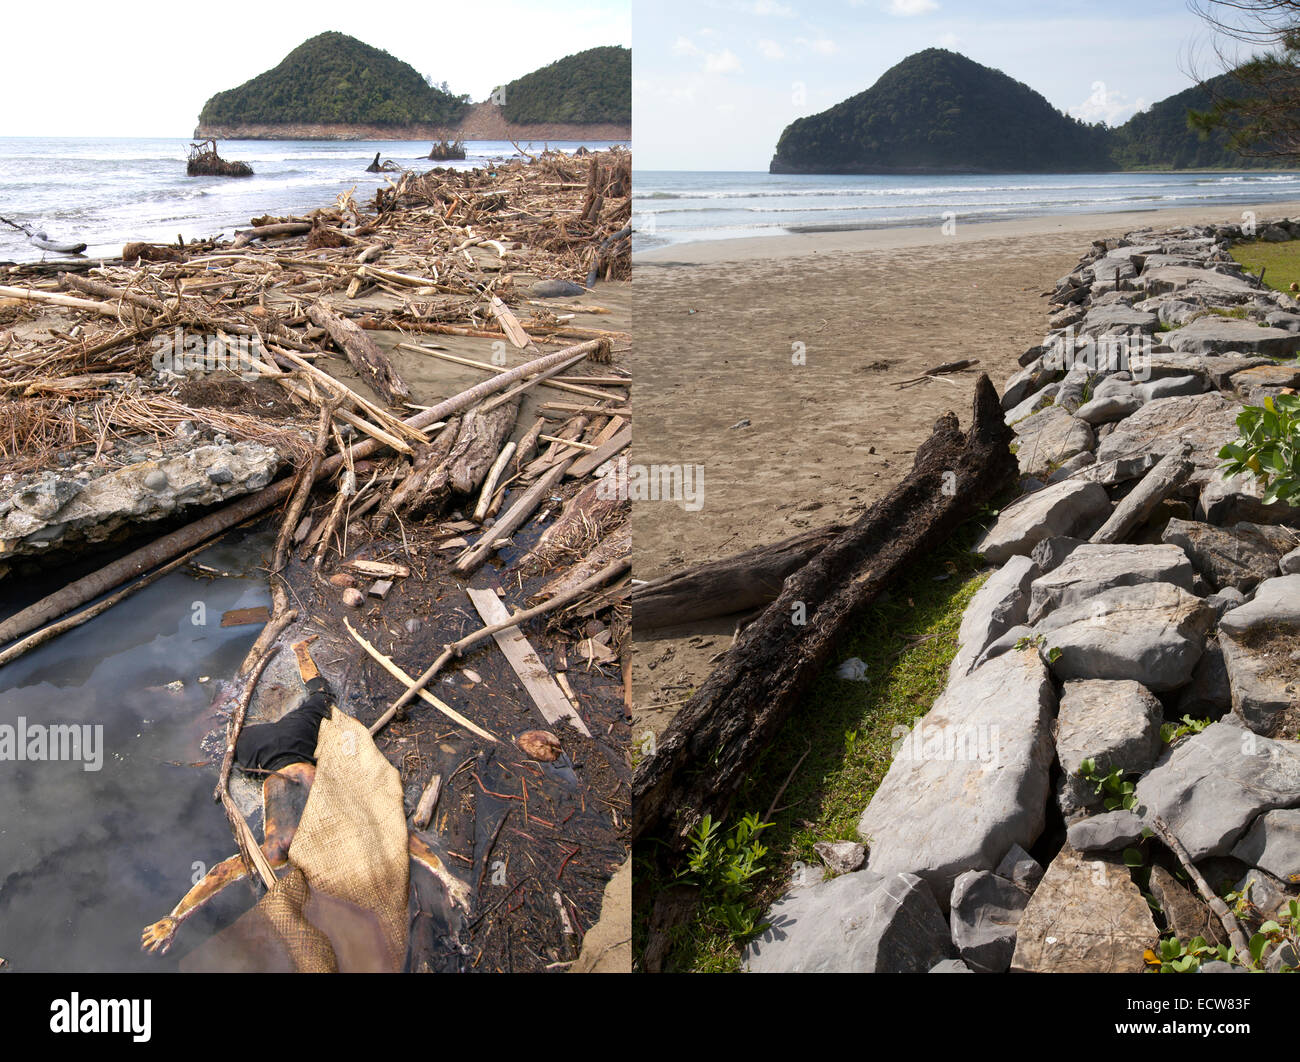 In this composite image a comparison has been made between a scene in 2005 (LEFT) and 2014 (RIGHT) ***LEFT IMAGE*** LEUPUNG, ACEH, INDONESIA - JANUARY 8: A body lies in water near the beach after the Tsunami in Leupung, Aceh, Indonesia -150 miles from southern Asia's massive earthquake's epicenter on Tuesday January 8 2005.  Leaping, Aceh, Indonesia.  ***RIGHT IMAGE*** LEUPUNG, ACEH, INDONESIA - DECEMBER 13: A waterfront scene prior to the ten year anniversary of the 2004 earthquake and tsunami on December 13, 2014 in Leupung, Aceh, Indonesia. Aceh was the worst hit location, being the closest Stock Photo